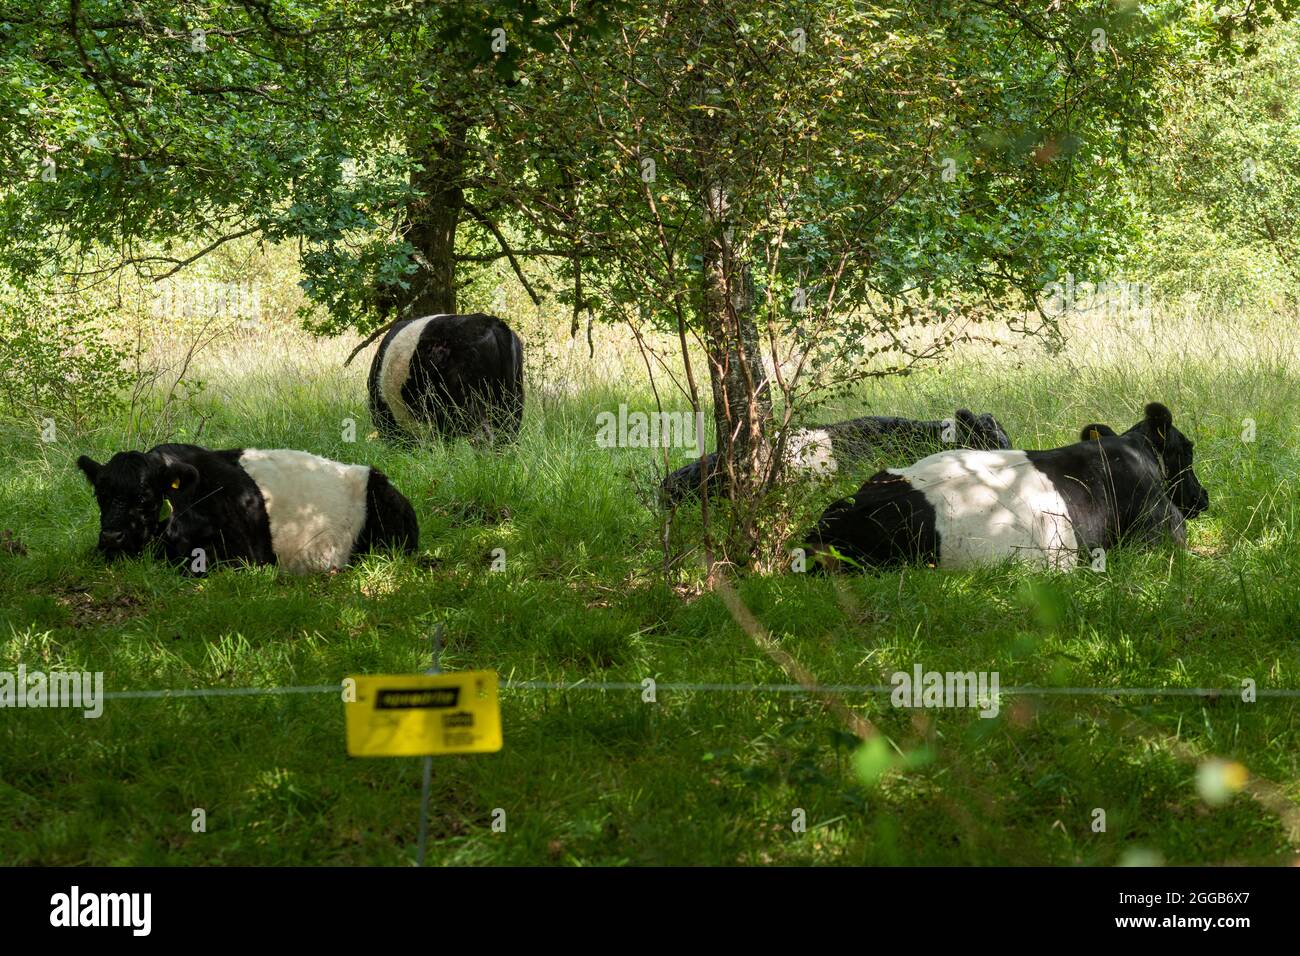 Belted galloway cattle grazing on a nature reserve to control the growth of scrub behind an electric fence, UK wildlife habitat management Stock Photo